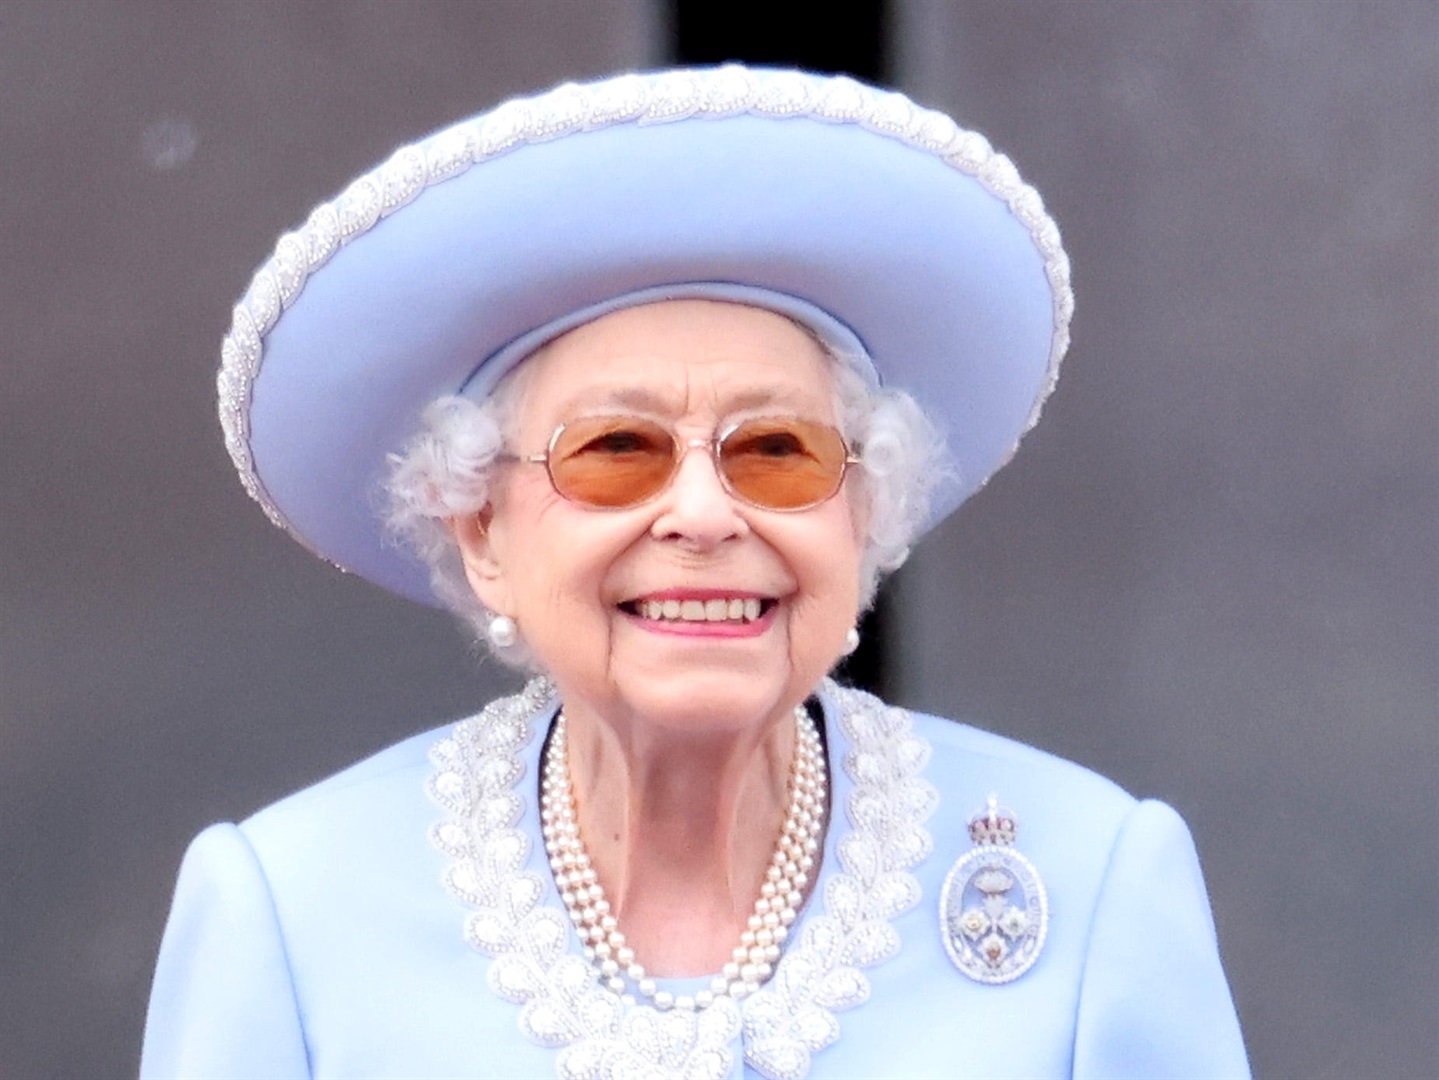 American tourists once met the Queen and had no idea who she was — so ...